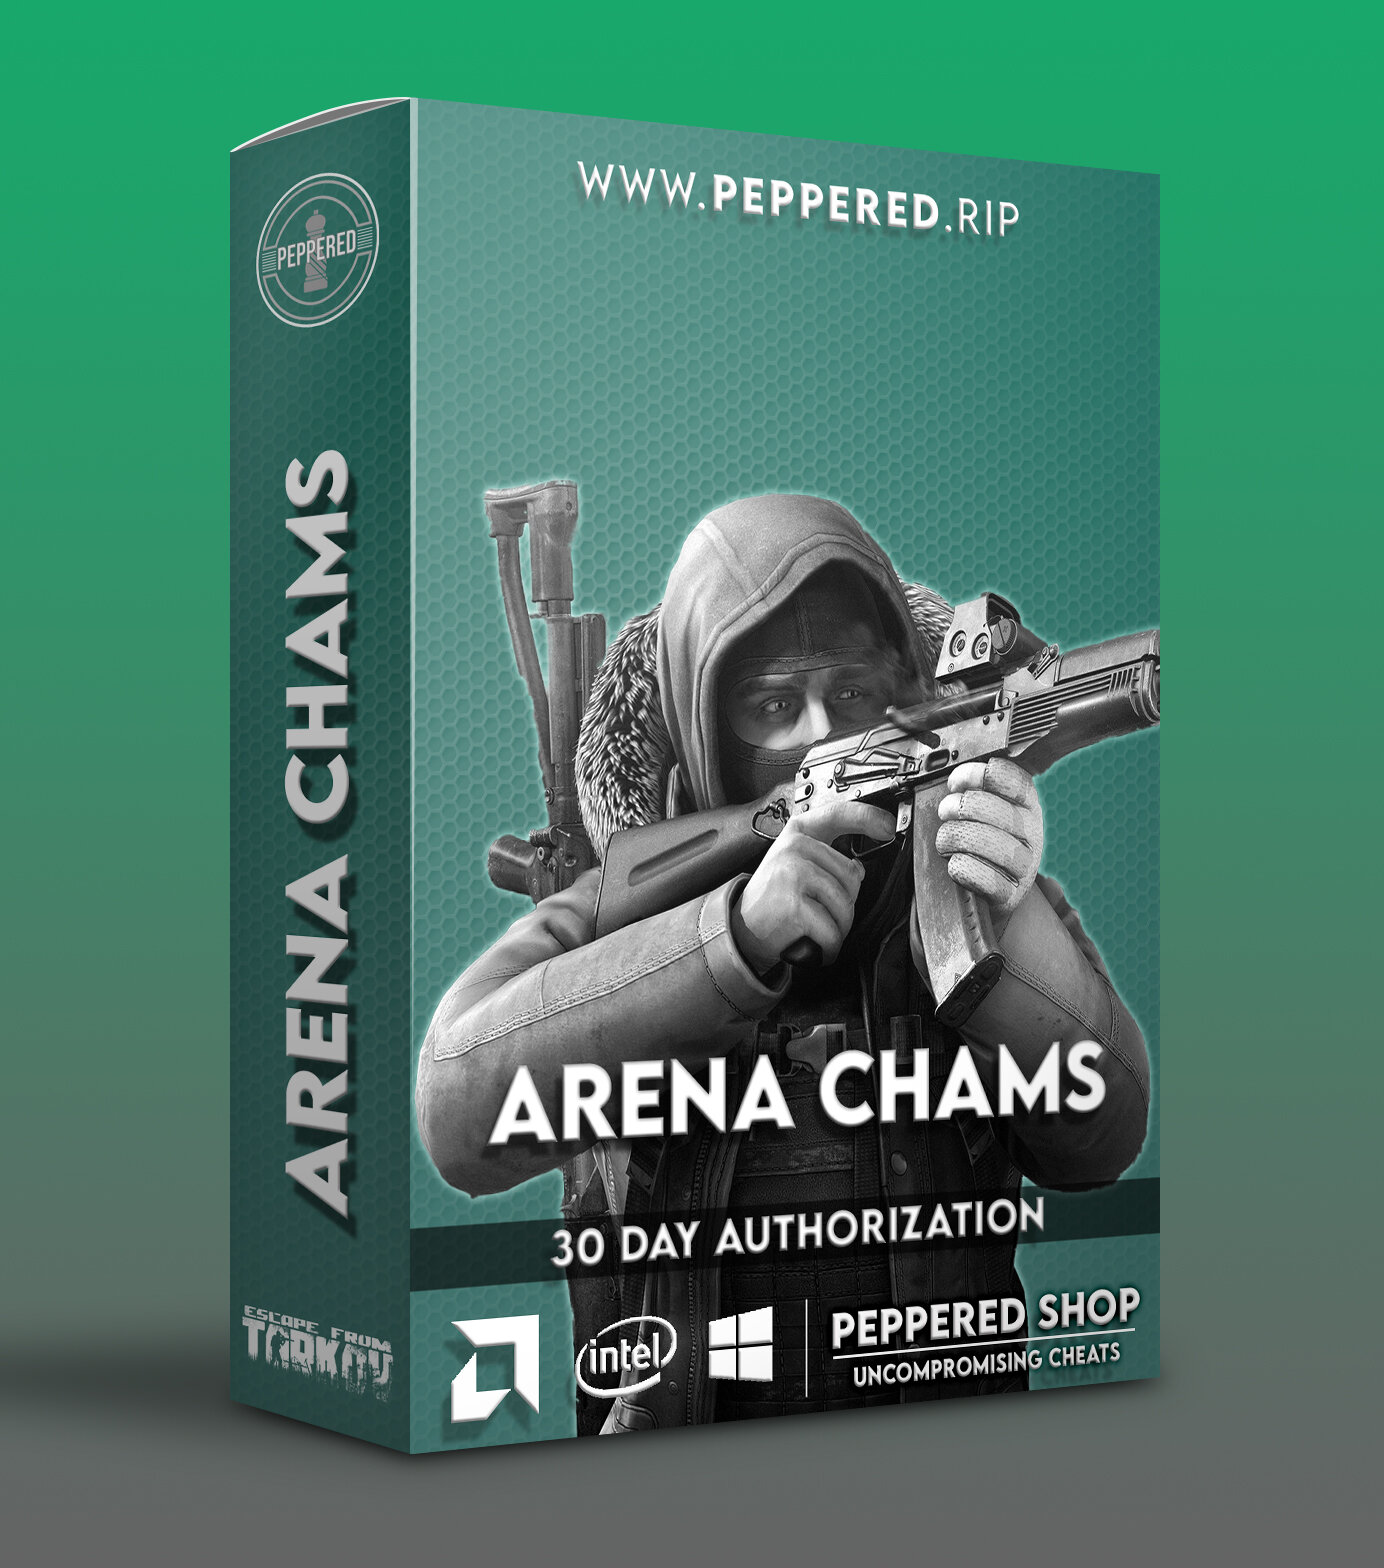 ARENA CHAMS 30 DAY